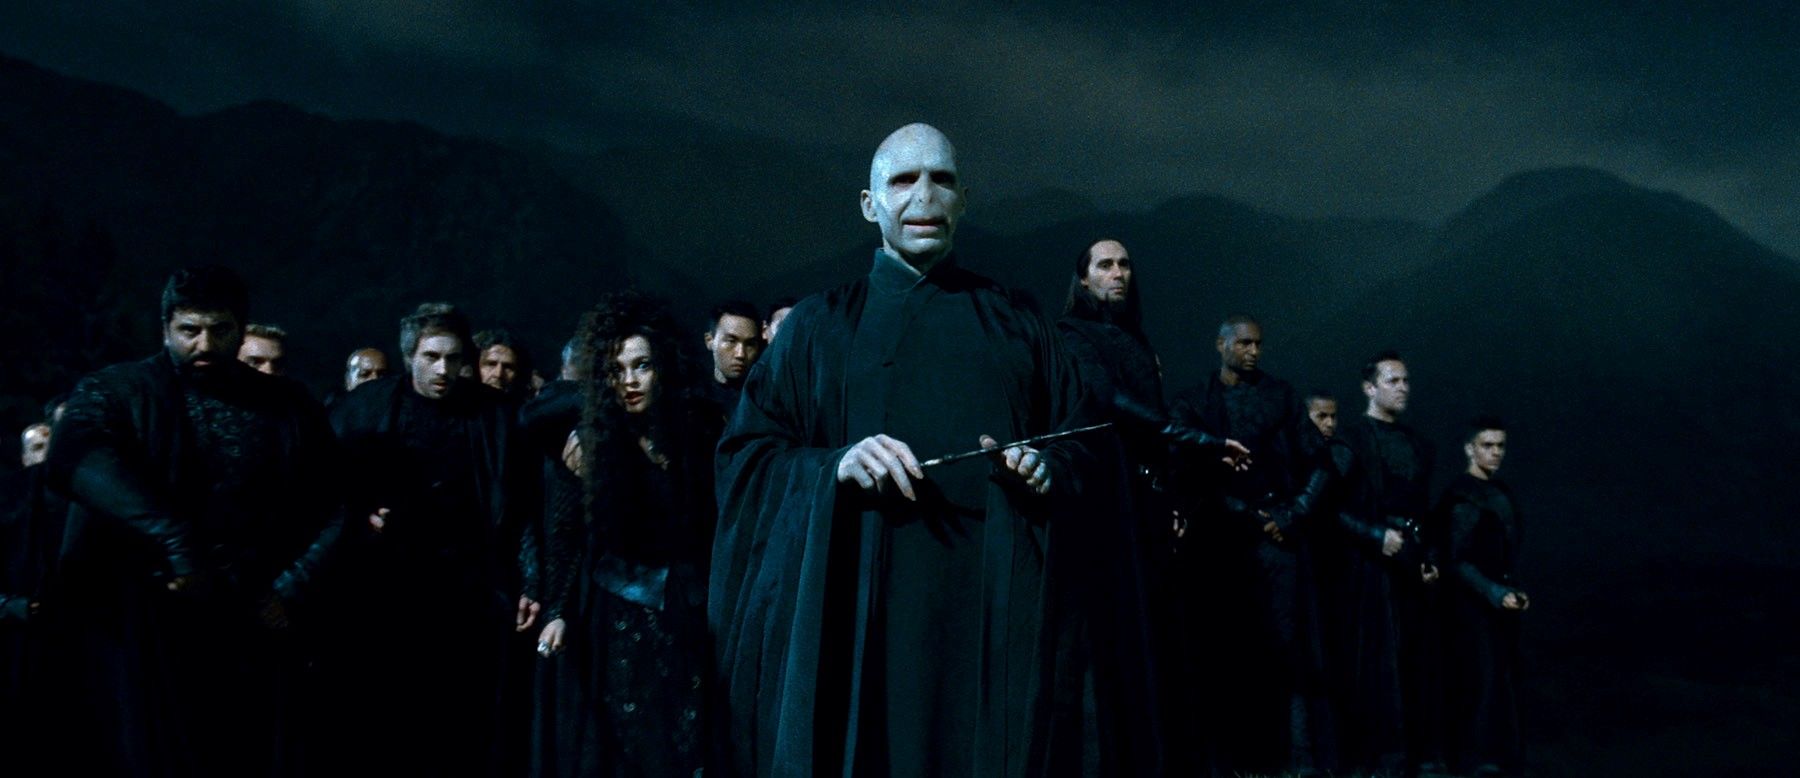 Harry Potter and the Deathly Hallows Photo #3